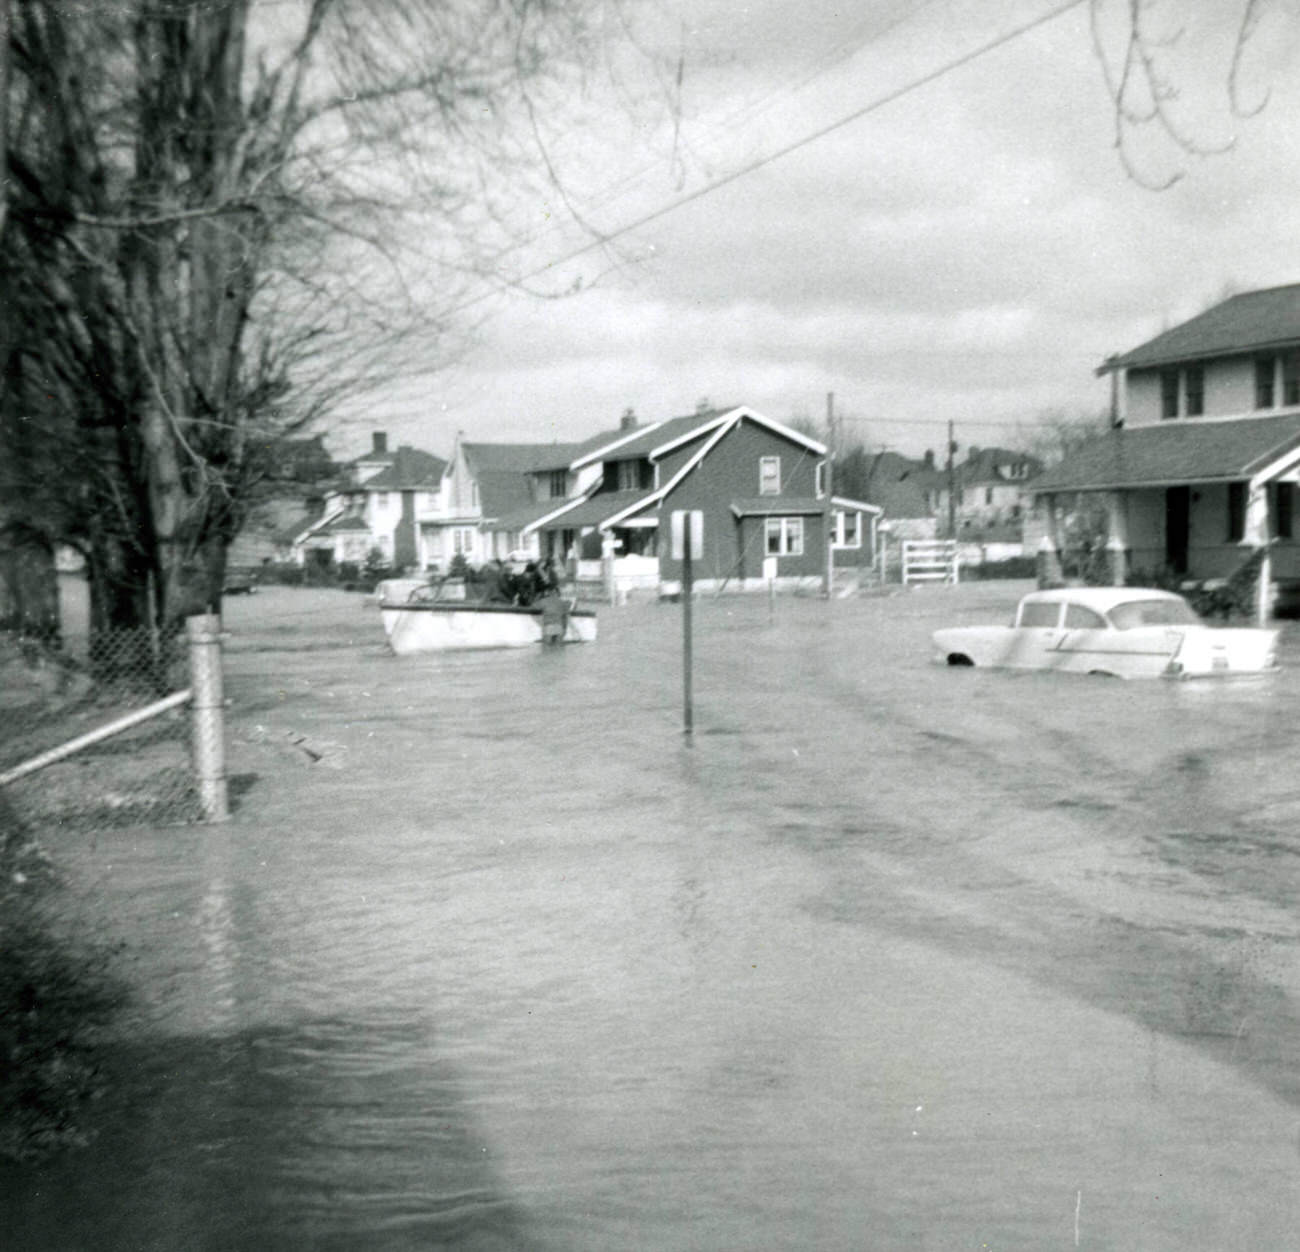 Views of the 1959 flood in Columbus from 257 South Central Avenue, 1959.